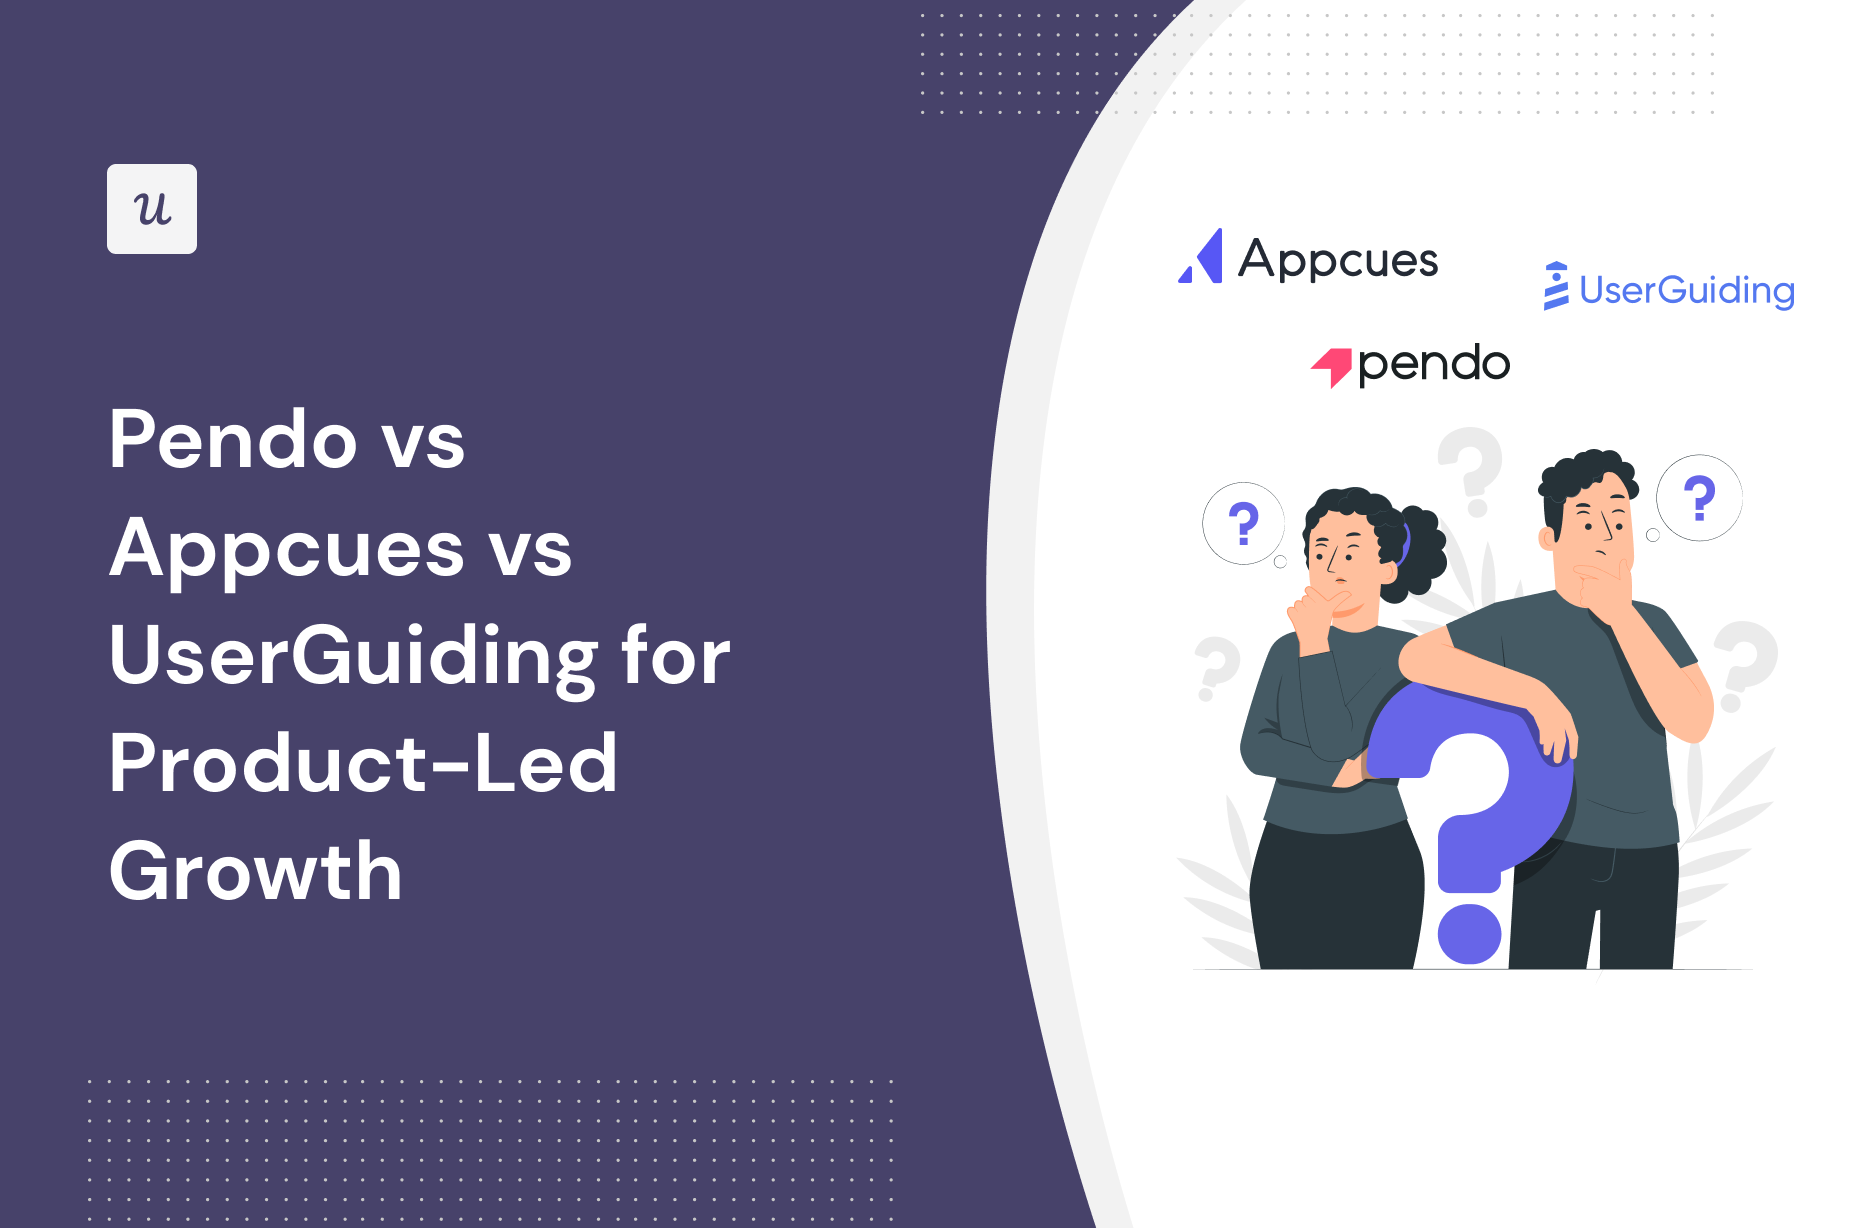 Pendo vs Appcues vs UserGuiding for Product-Led Growth